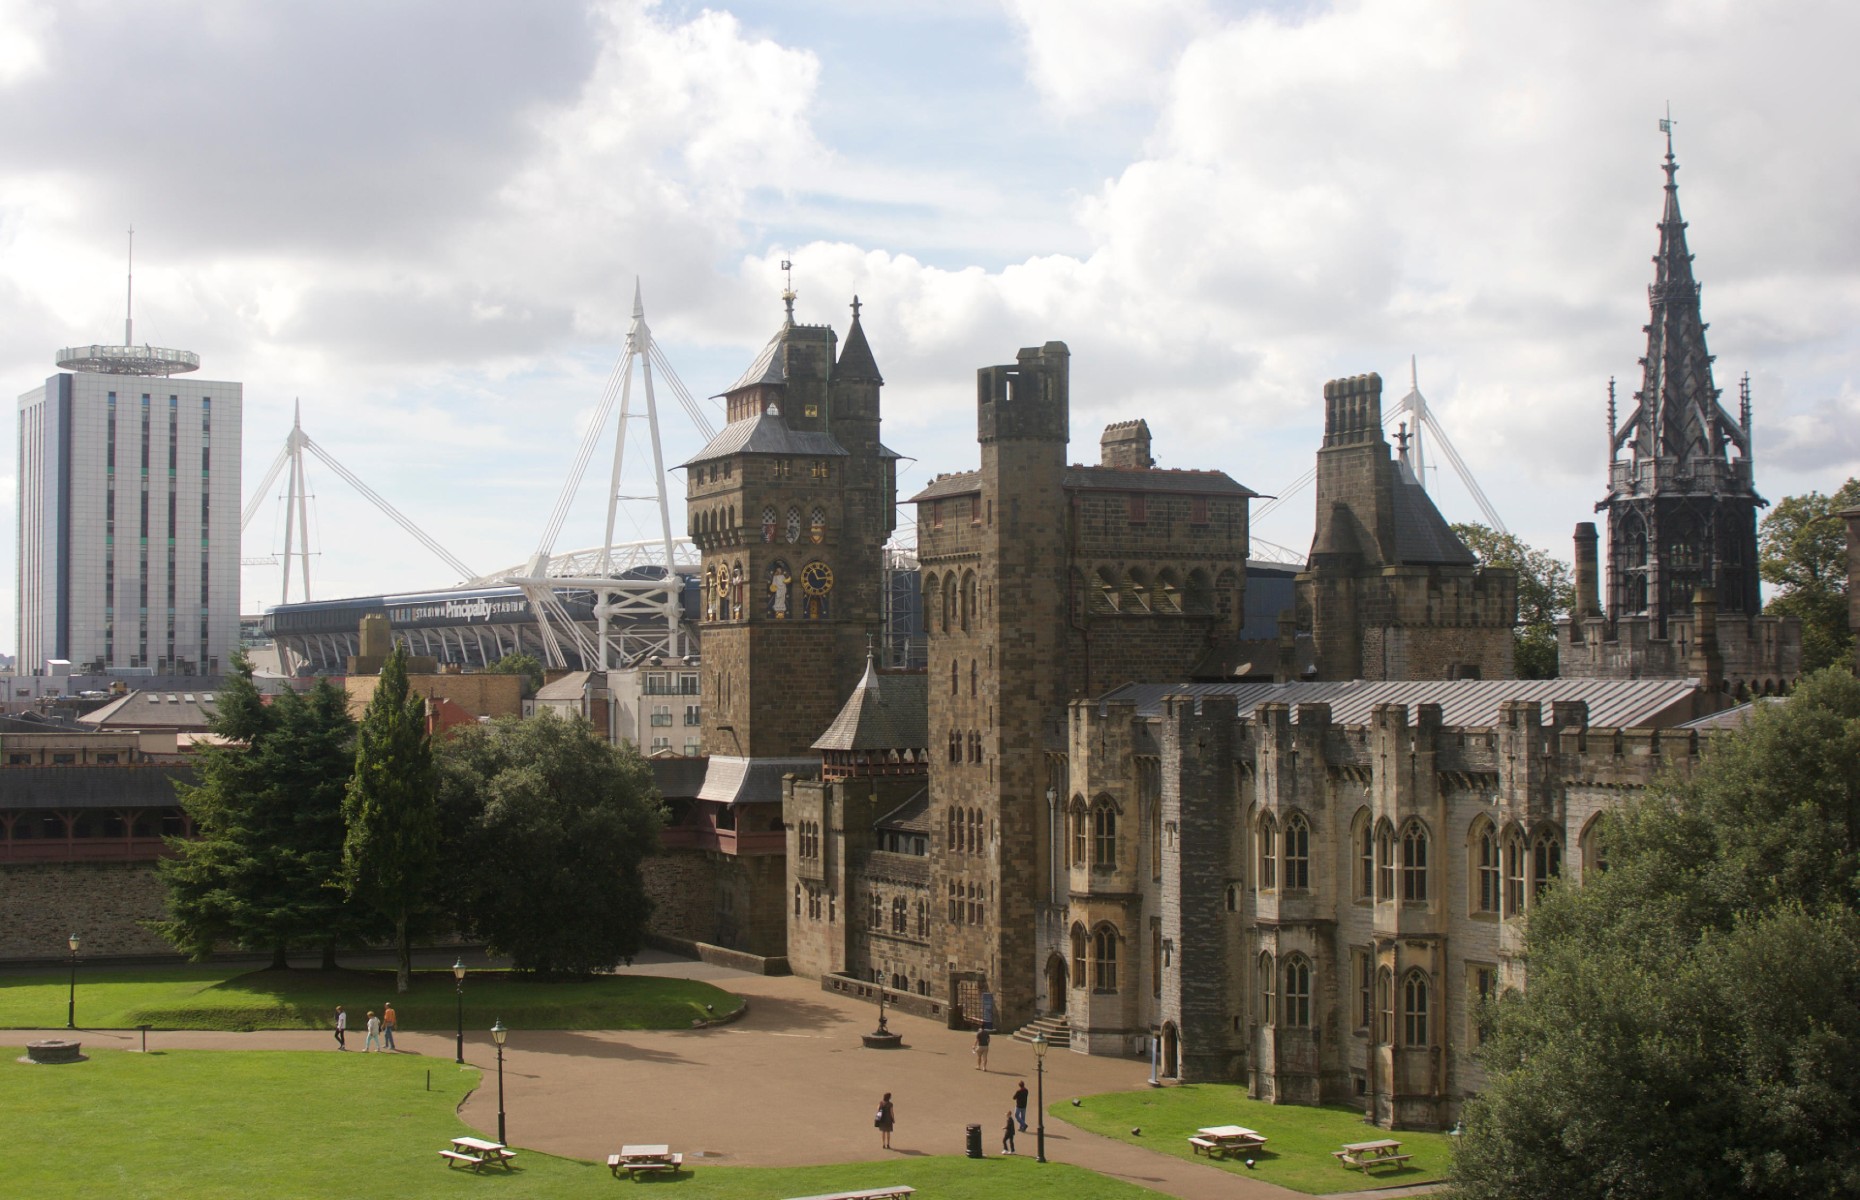 Cardiff Castle with Principality Stadium in the distance (Image:  Robert Gray / Alamy Stock Photo)